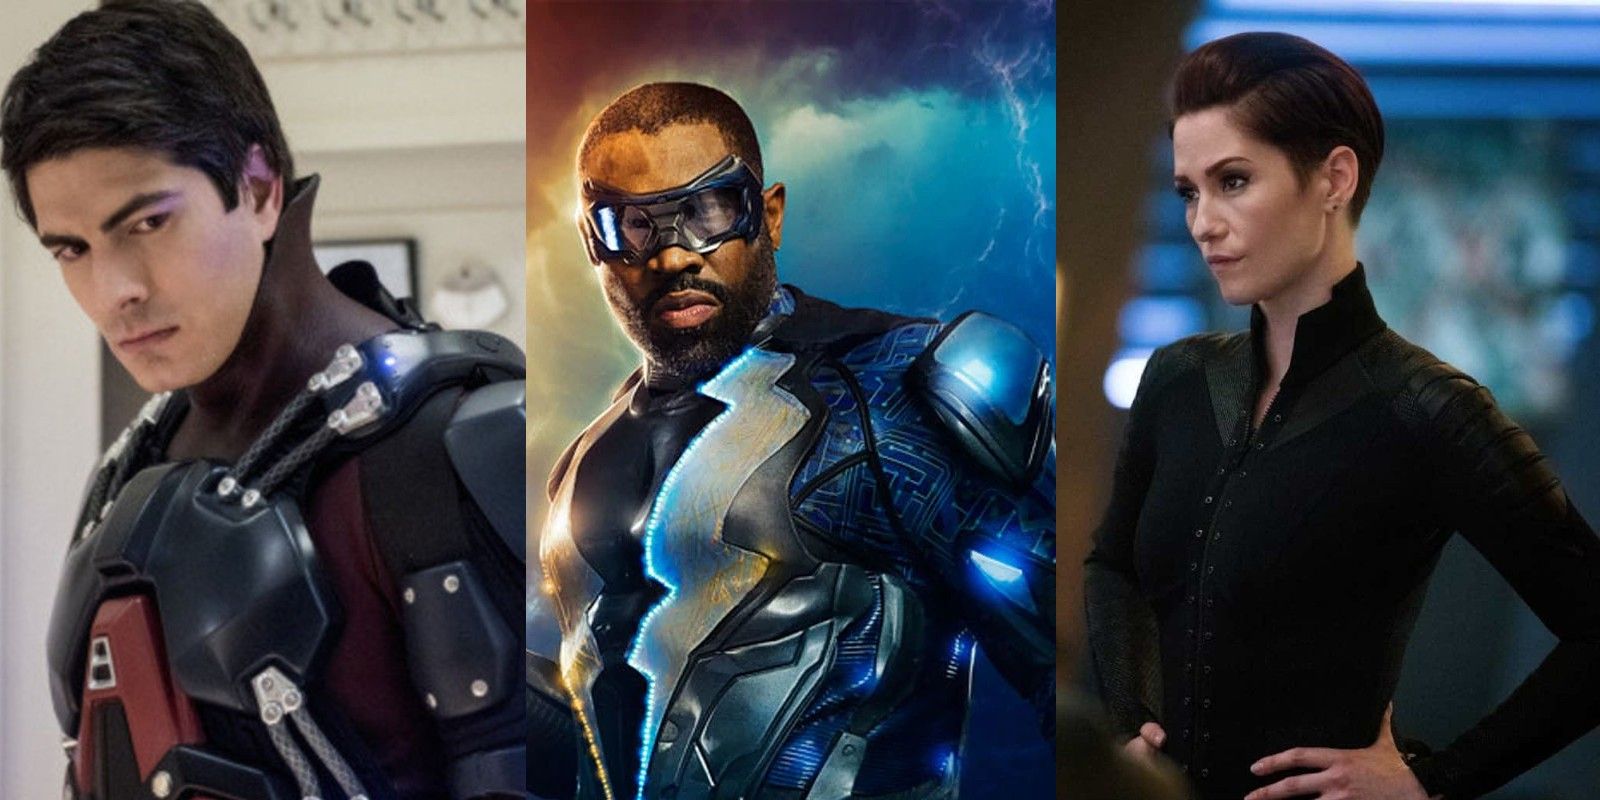 Atom, Black Lightning and Alex Danvers appearing in Flash